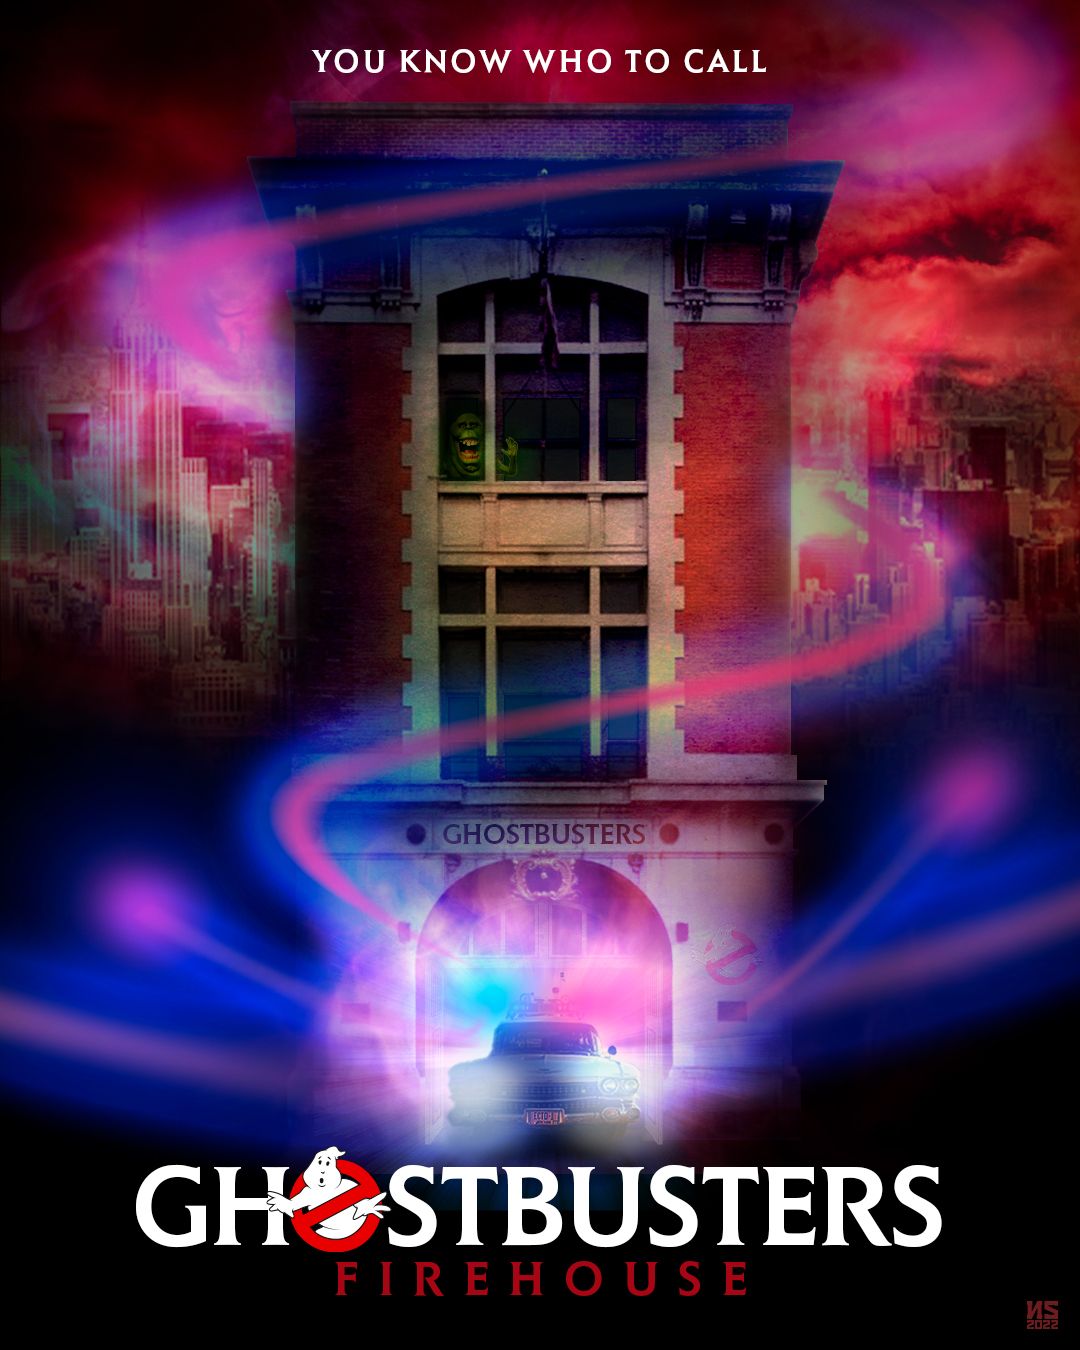 Ghostbusters Concept Poster | PosterSpy